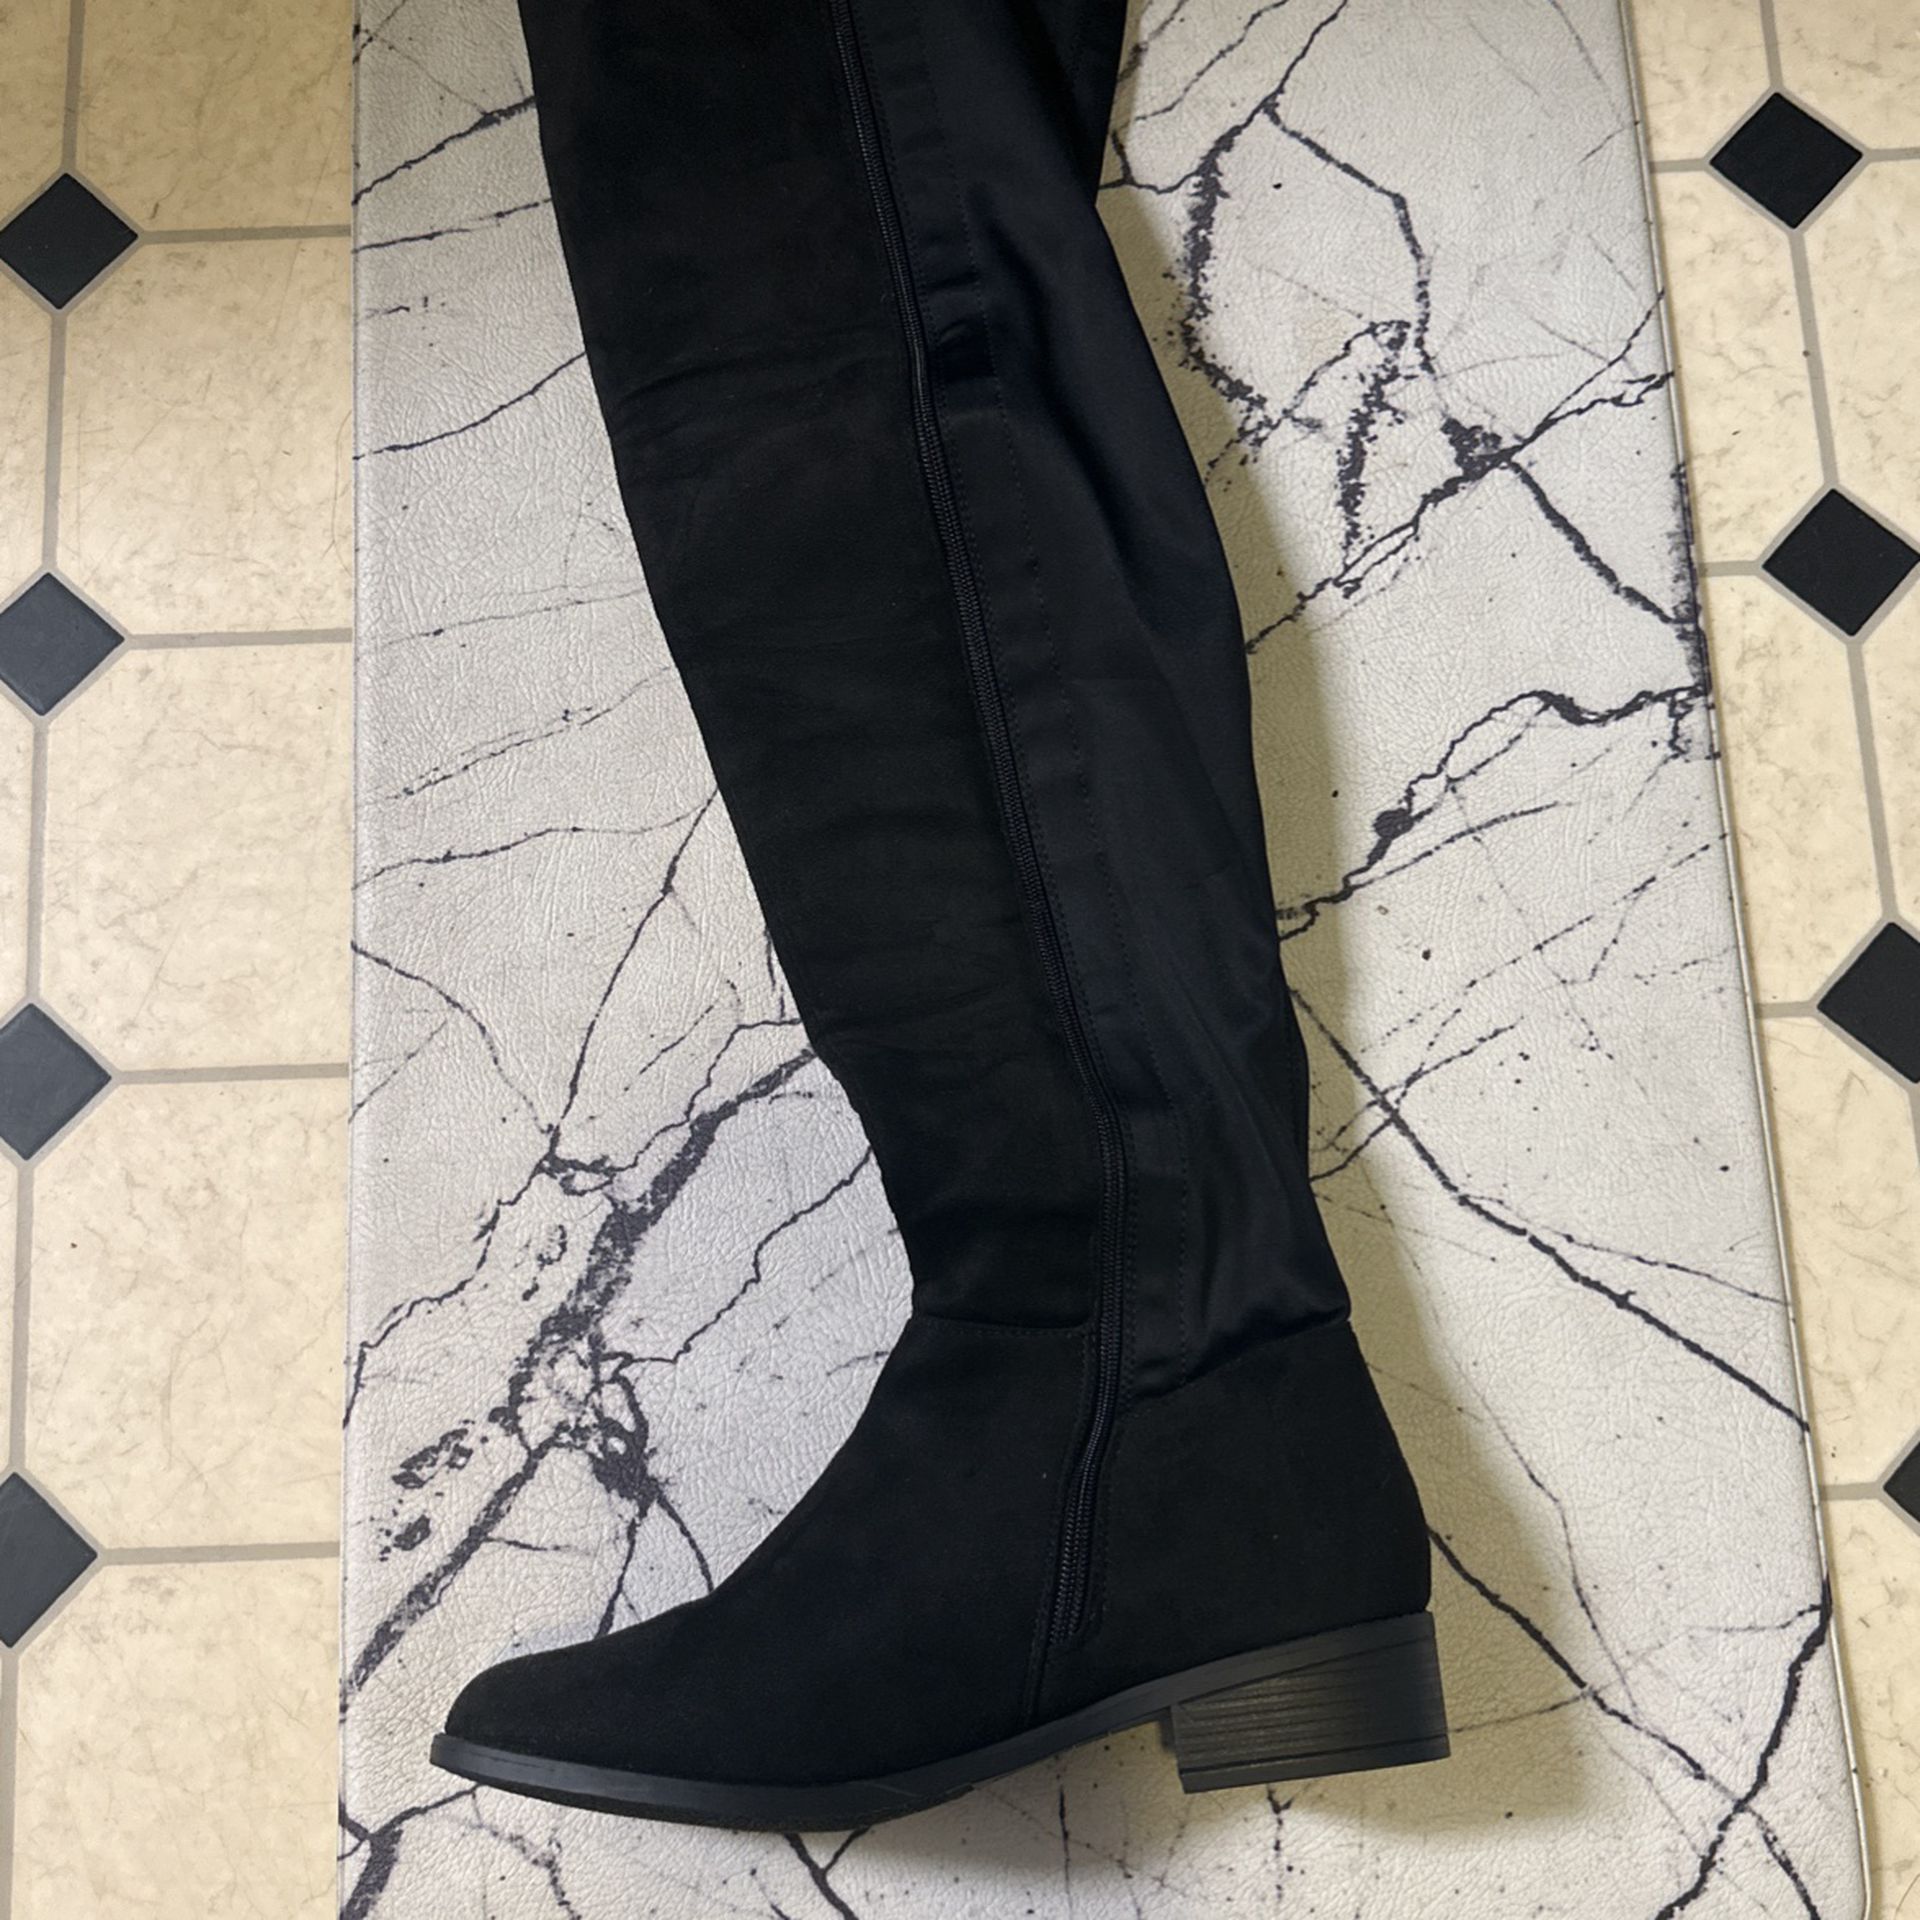 Thigh High Boot (size 11) for Sale in Pumpkin Center, CA - OfferUp